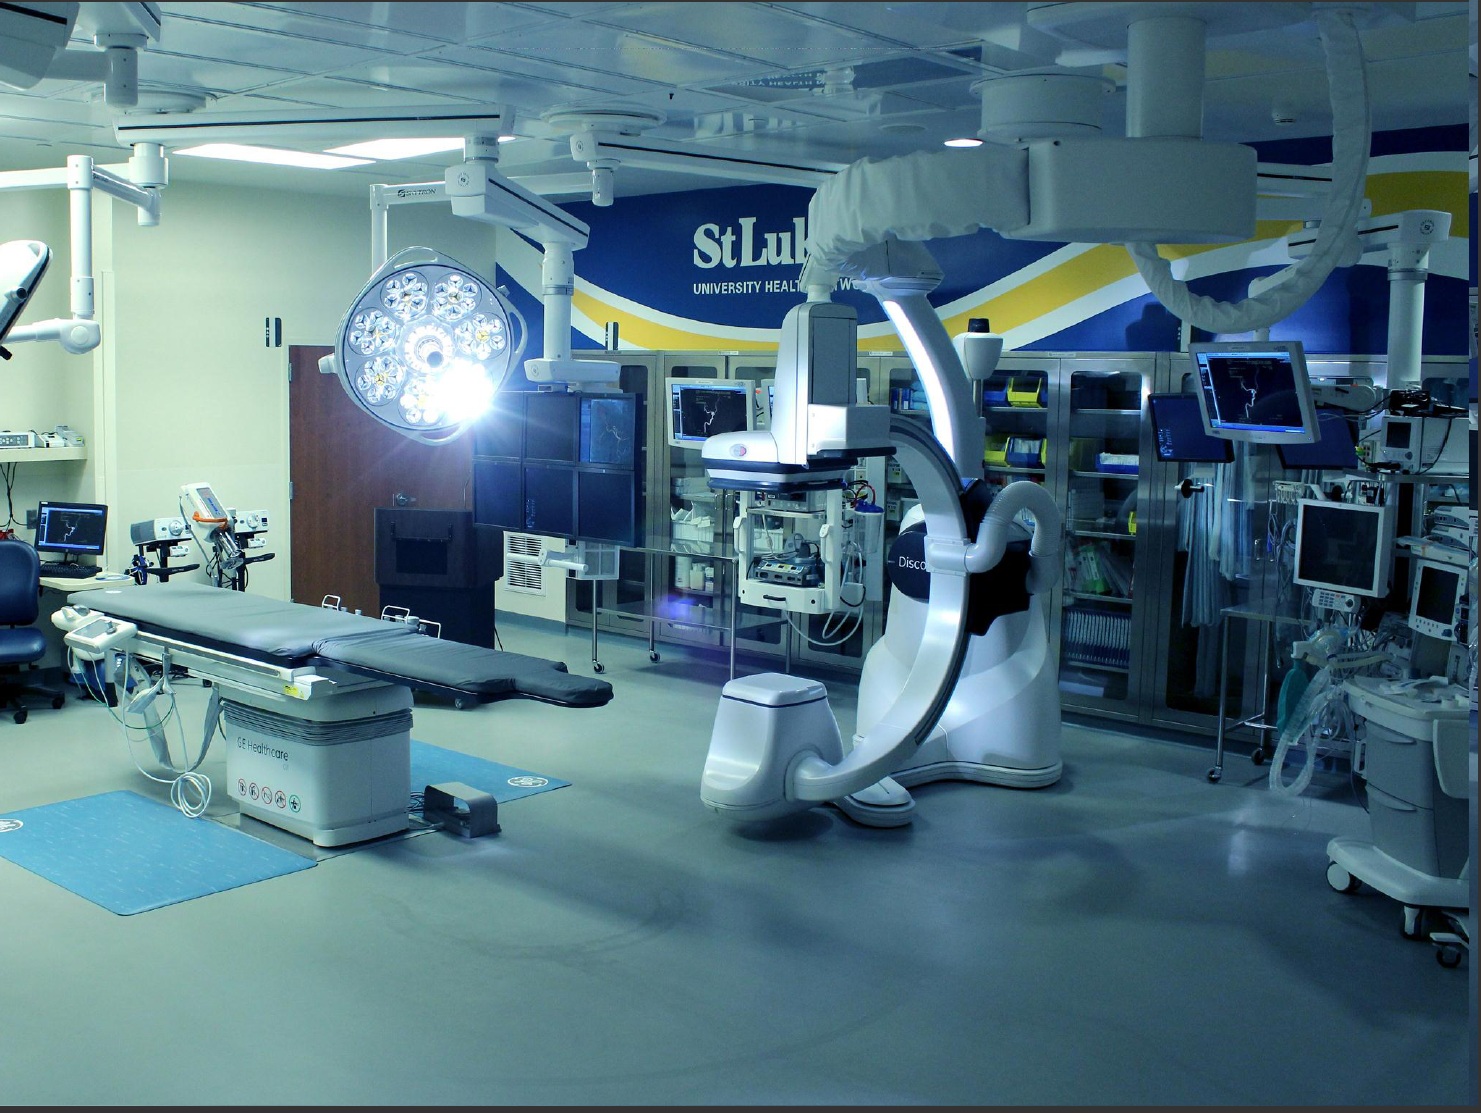 Hybrid-OR-Operating-Room-GE-Discovery-IGS-730-Skytron-LED-Surgical-Lights-Equipment-Booms-PA-27.jpg